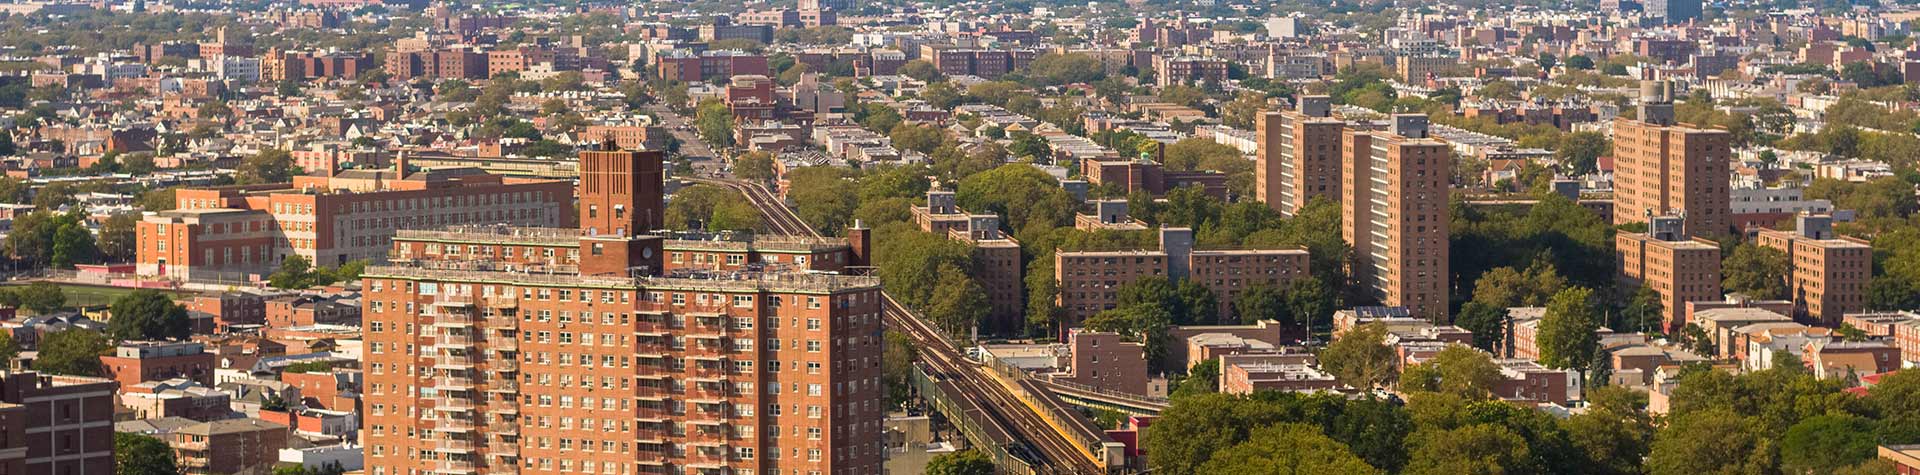 A view from above of affordable housing near New York City.